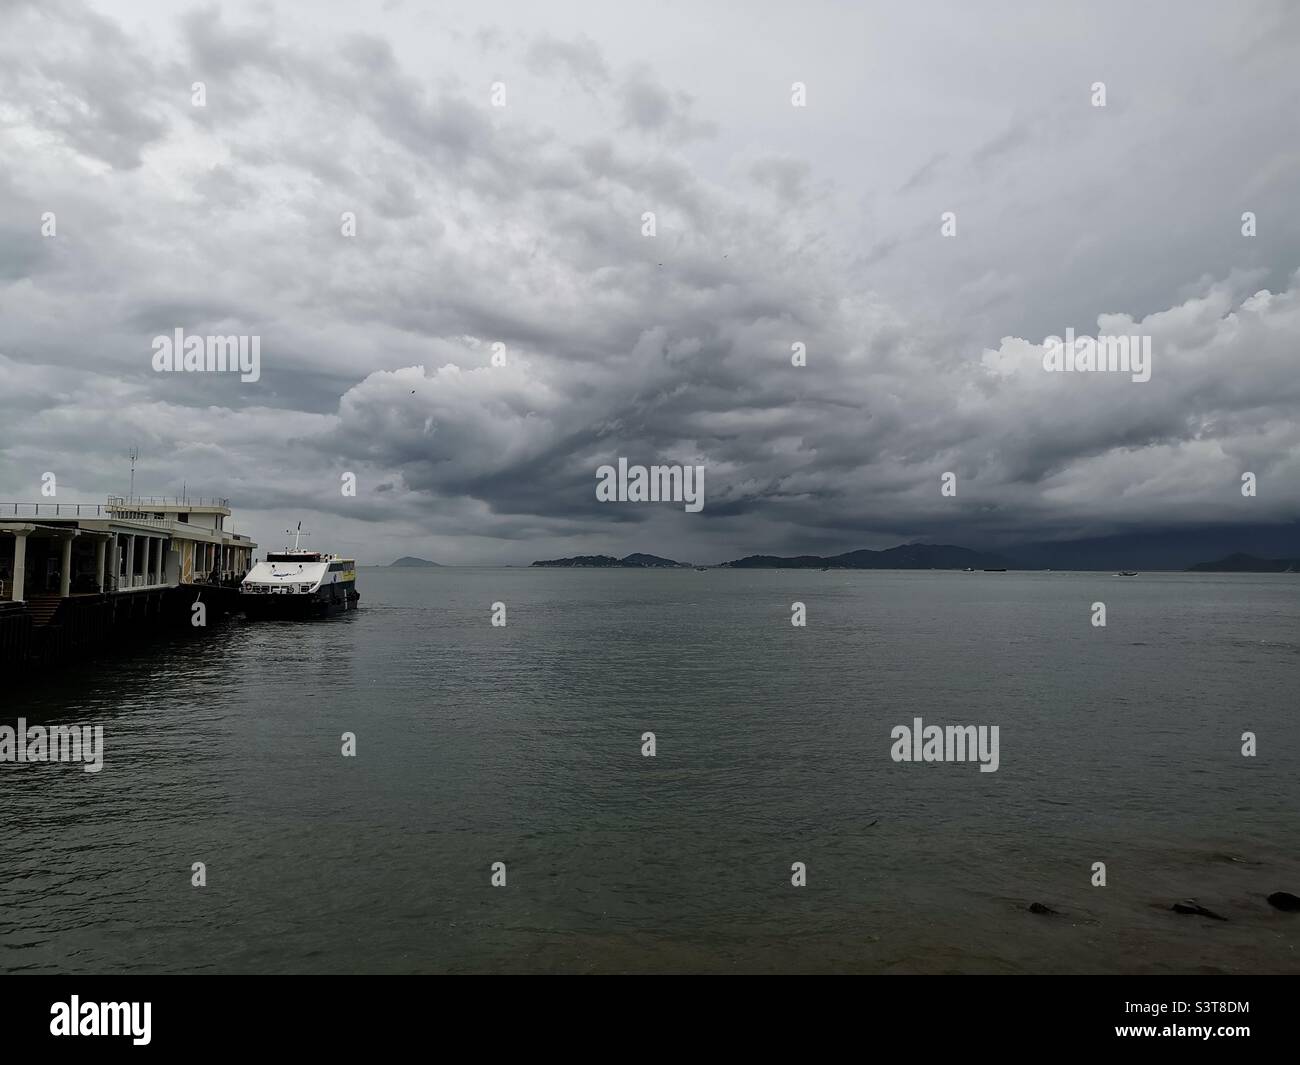 Stormy clouds over Cheung Chau, Hong Kong. Stock Photo